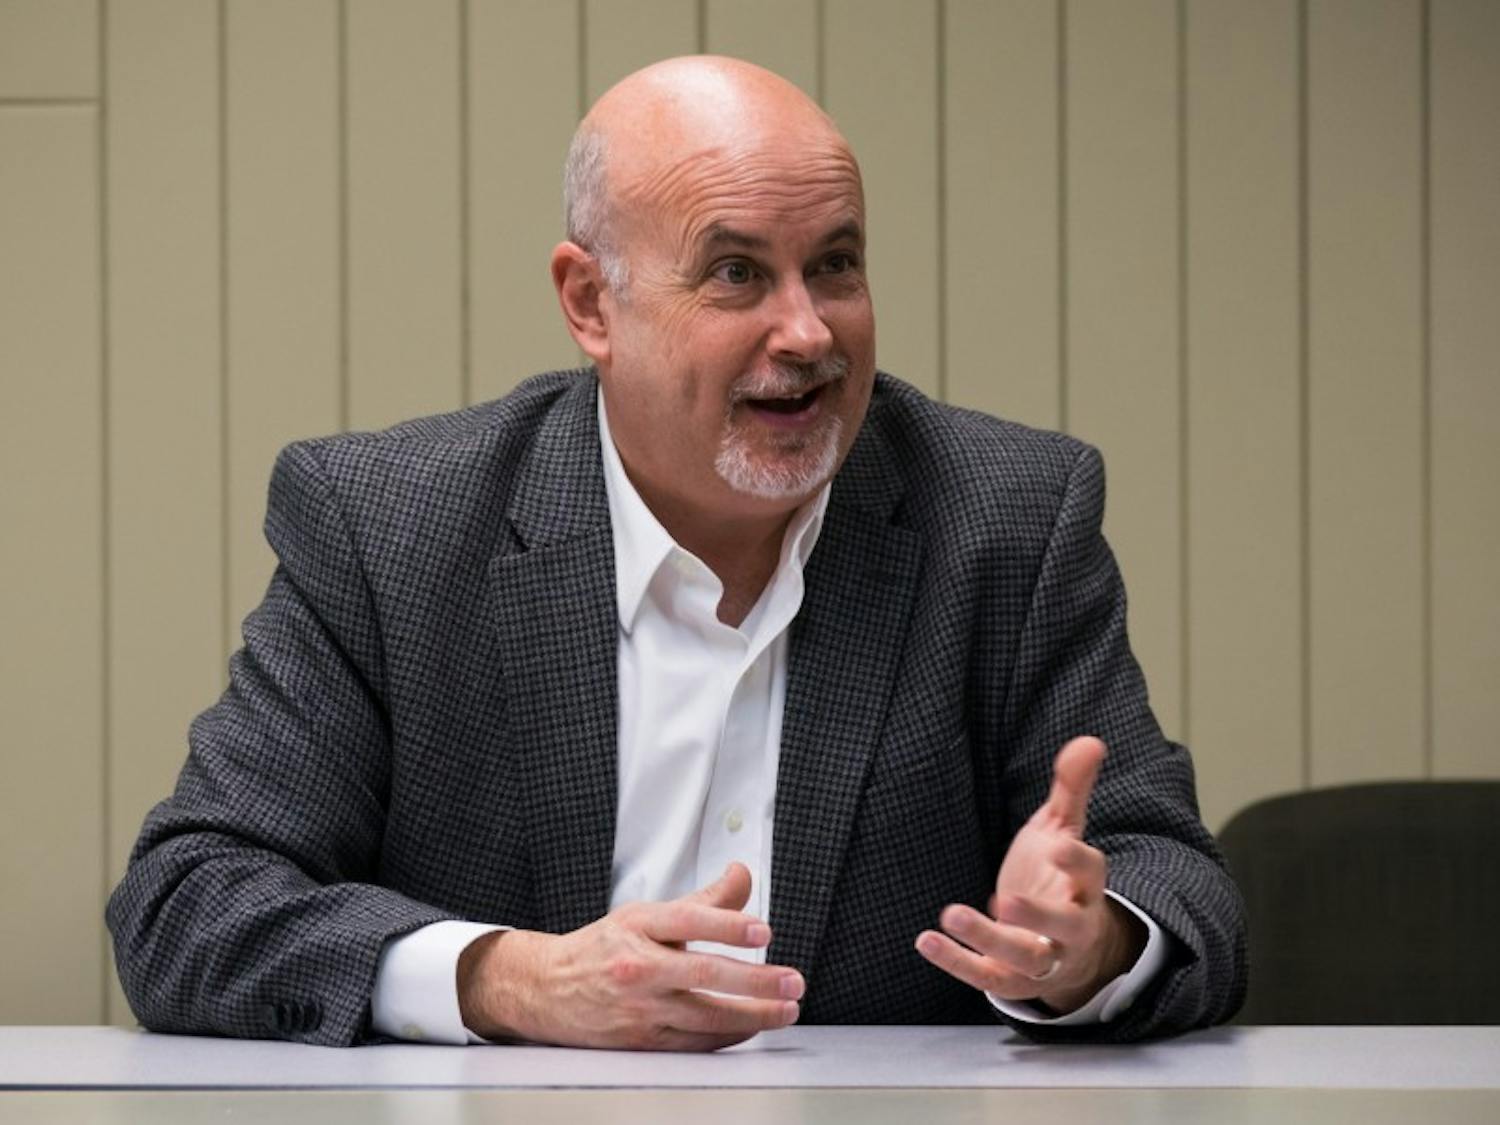 U.S. Rep. Mark Pocan, D-Wis., who received an undergraduate degree in journalism from UW-Madison, took a trip to Vilas Hall to speak with Cardinal staff about national and local issues affecting Wisconsin.